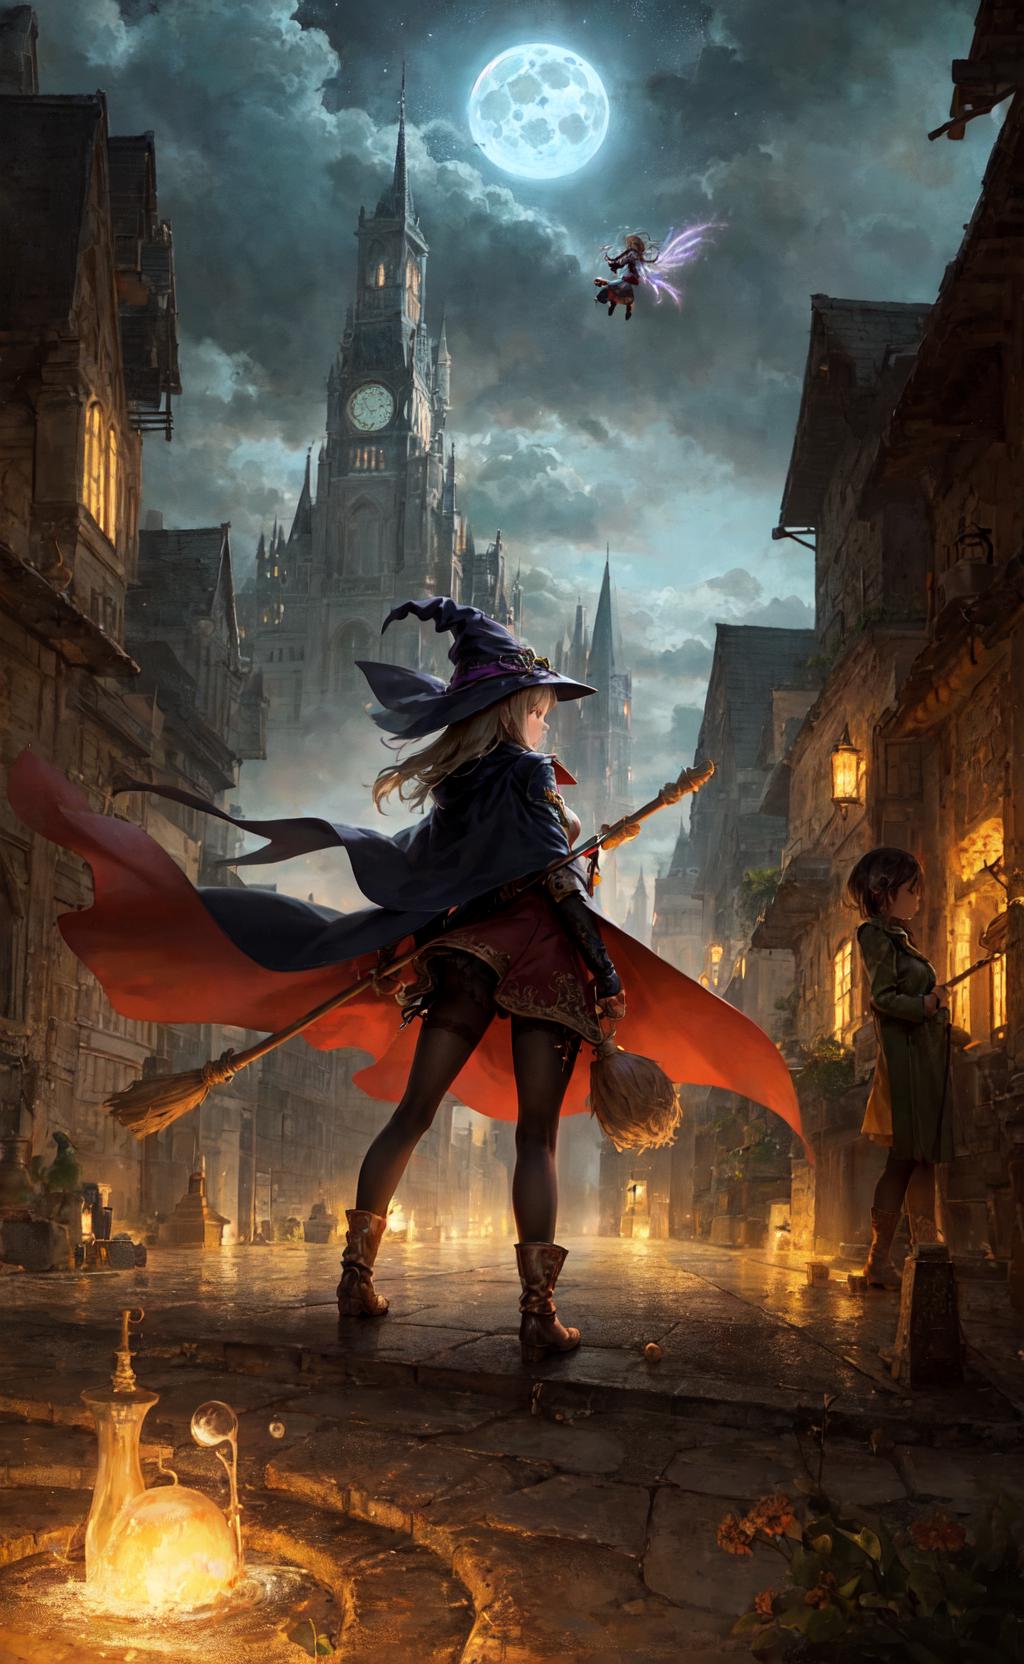 A witch with a broomstick in a fantasy setting.